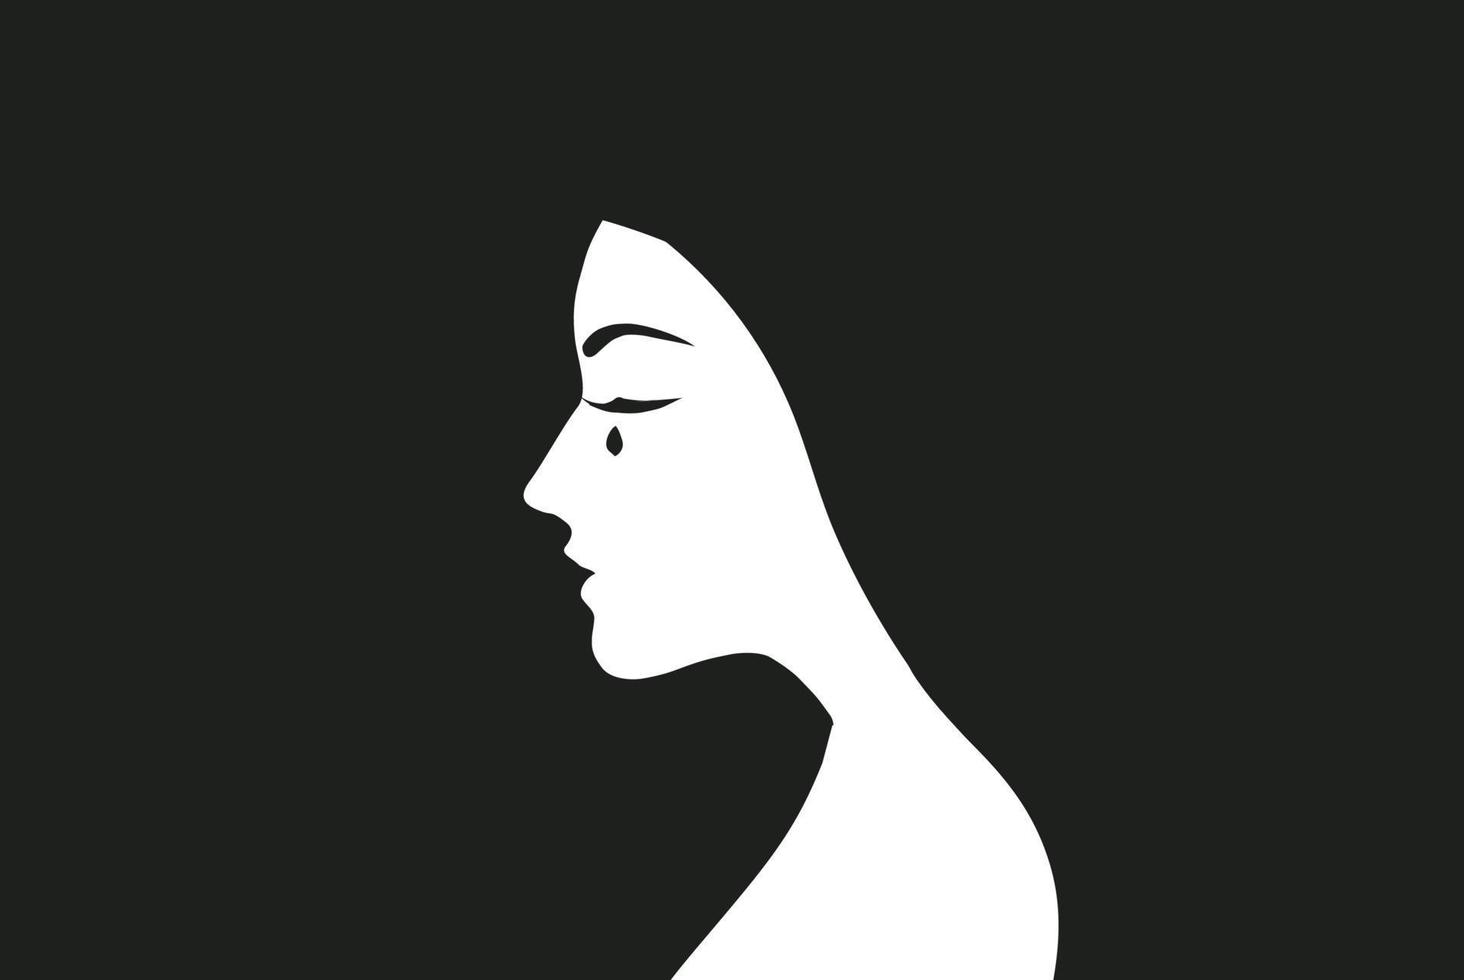 Silhouette of crying woman face on black background. Sadness and depression, broken heart feeling and stop violence against woman concept vector